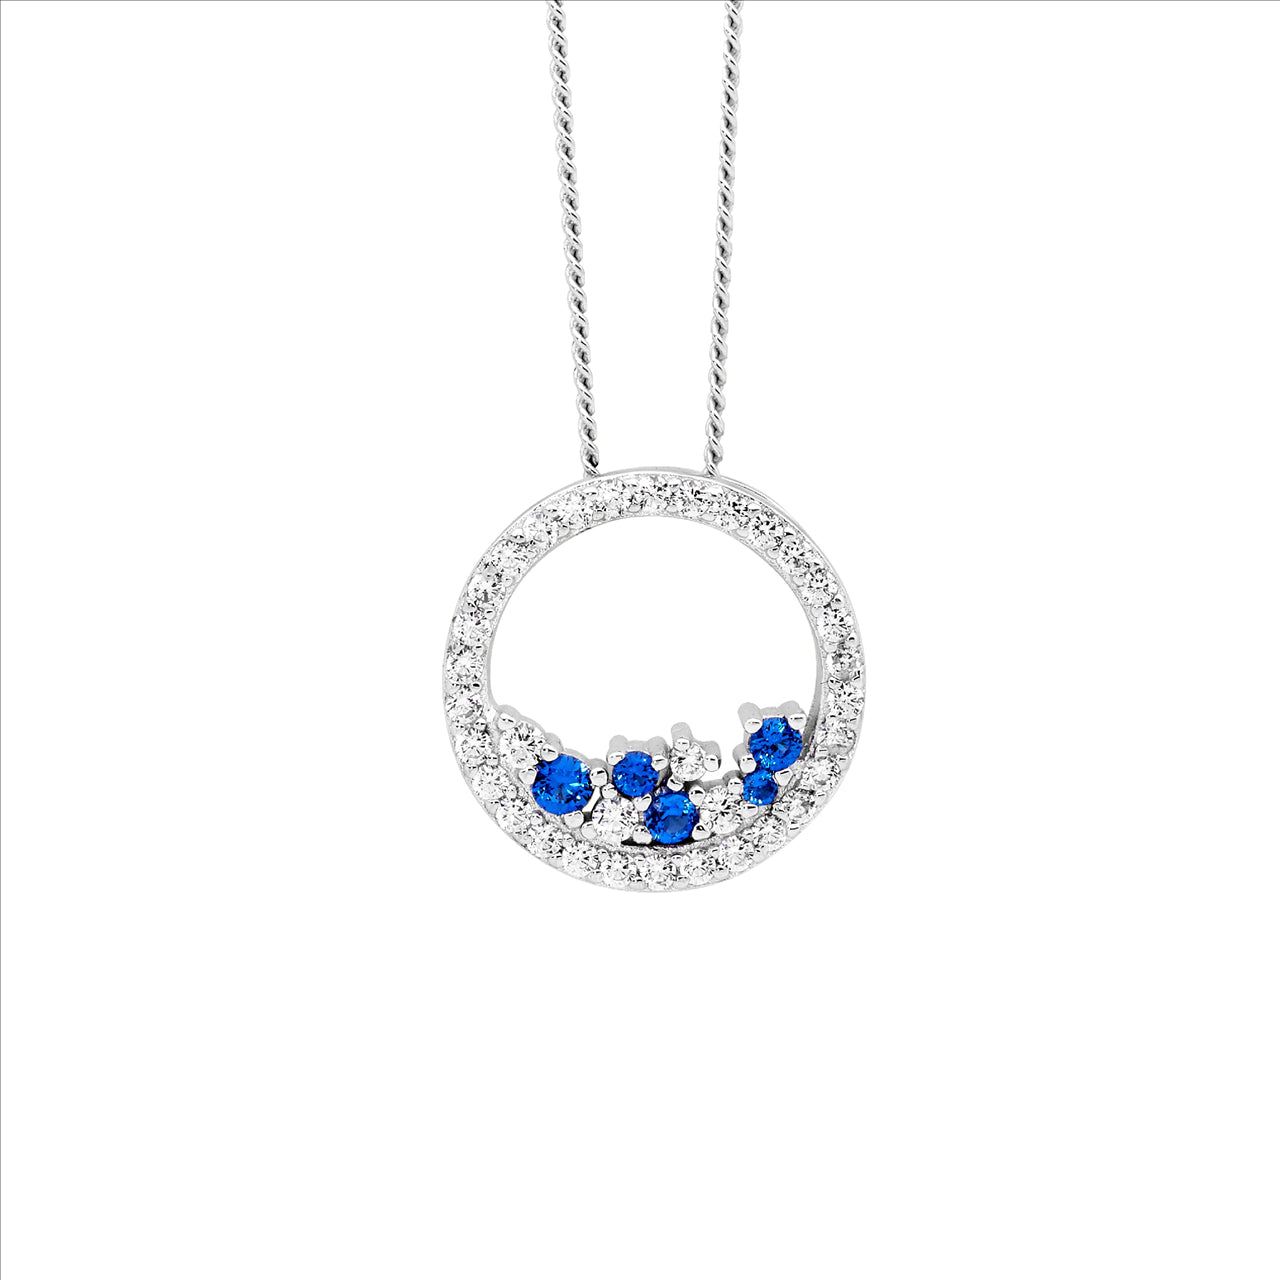 Sterling Silver Open Circle Necklace Blue & White Cubic Zirconias